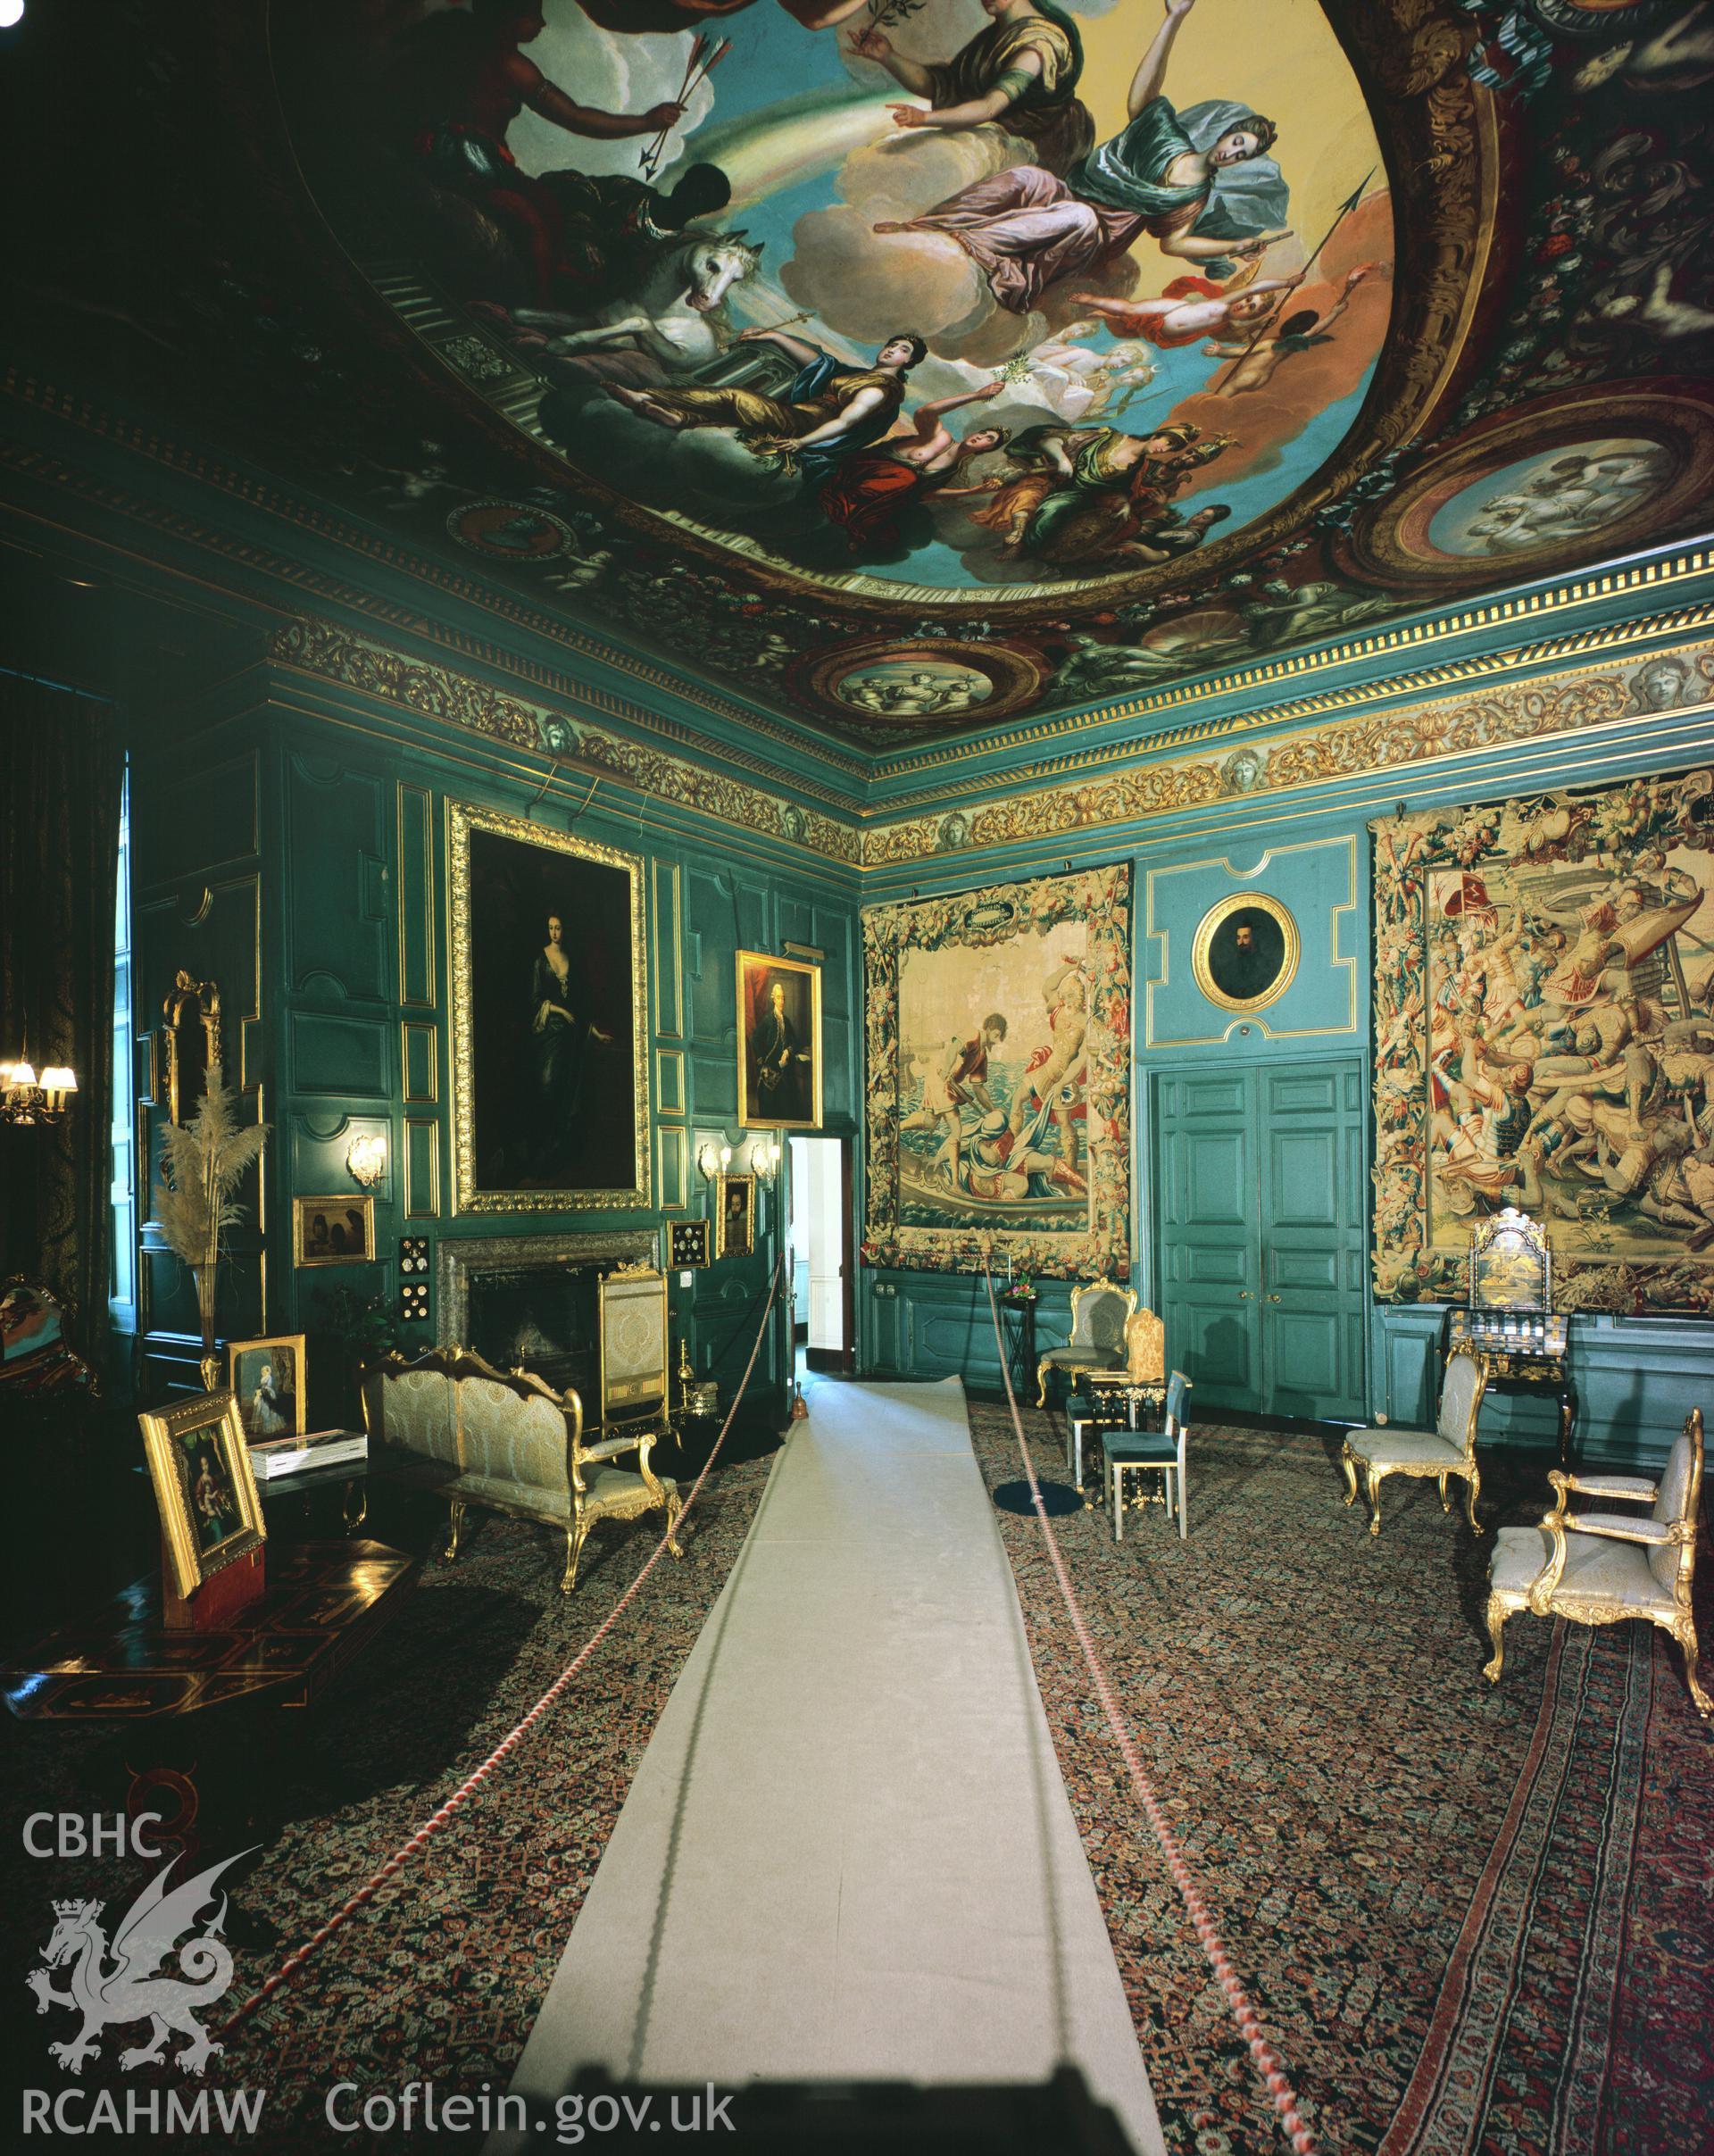 RCAHMW colour transparency showing the drawing room at Powis Castle taken by Iain Wright, 1979.